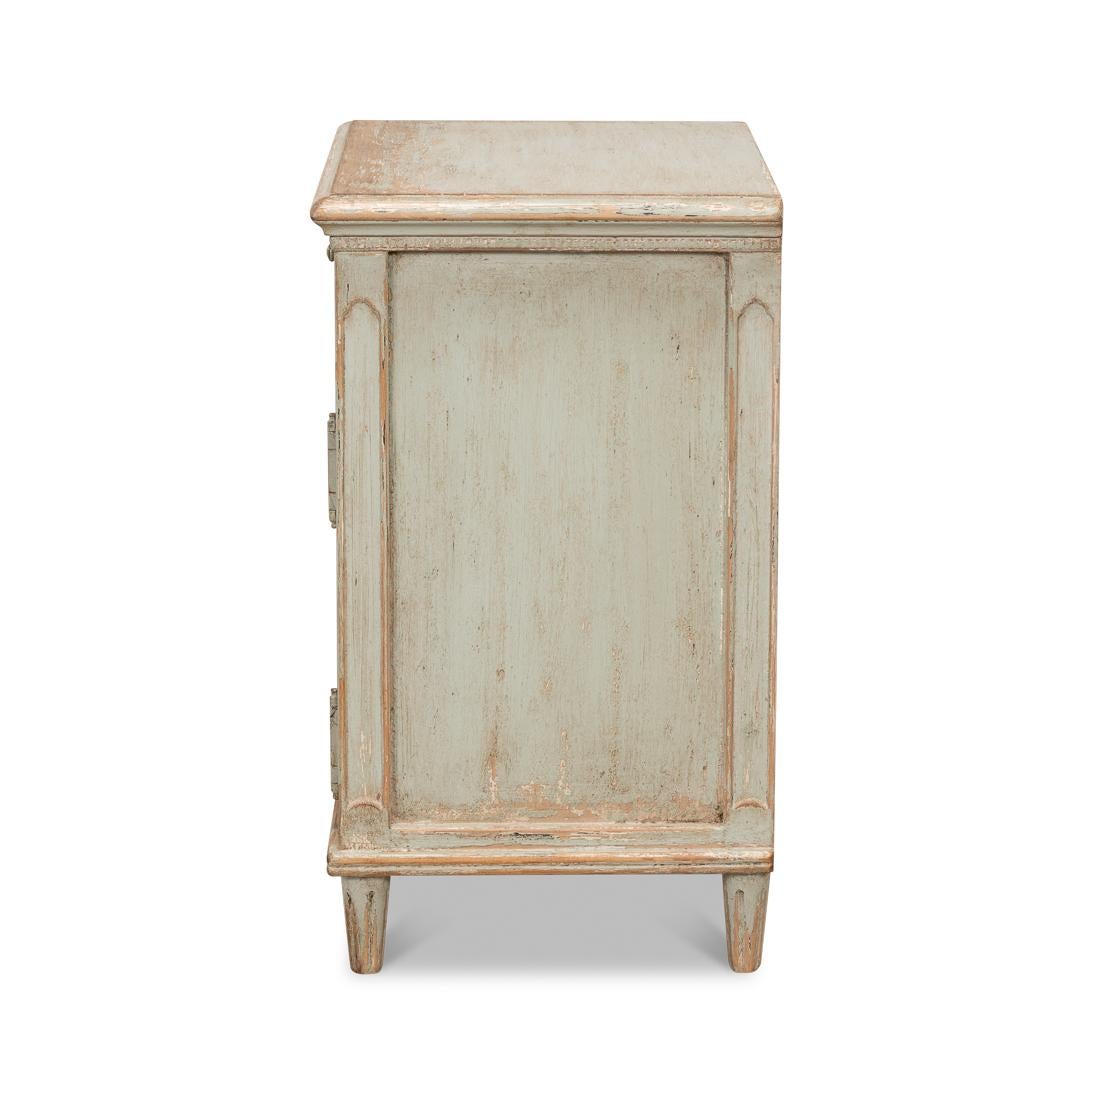 Wood Rustic Sage Painted Bedside Table For Sale